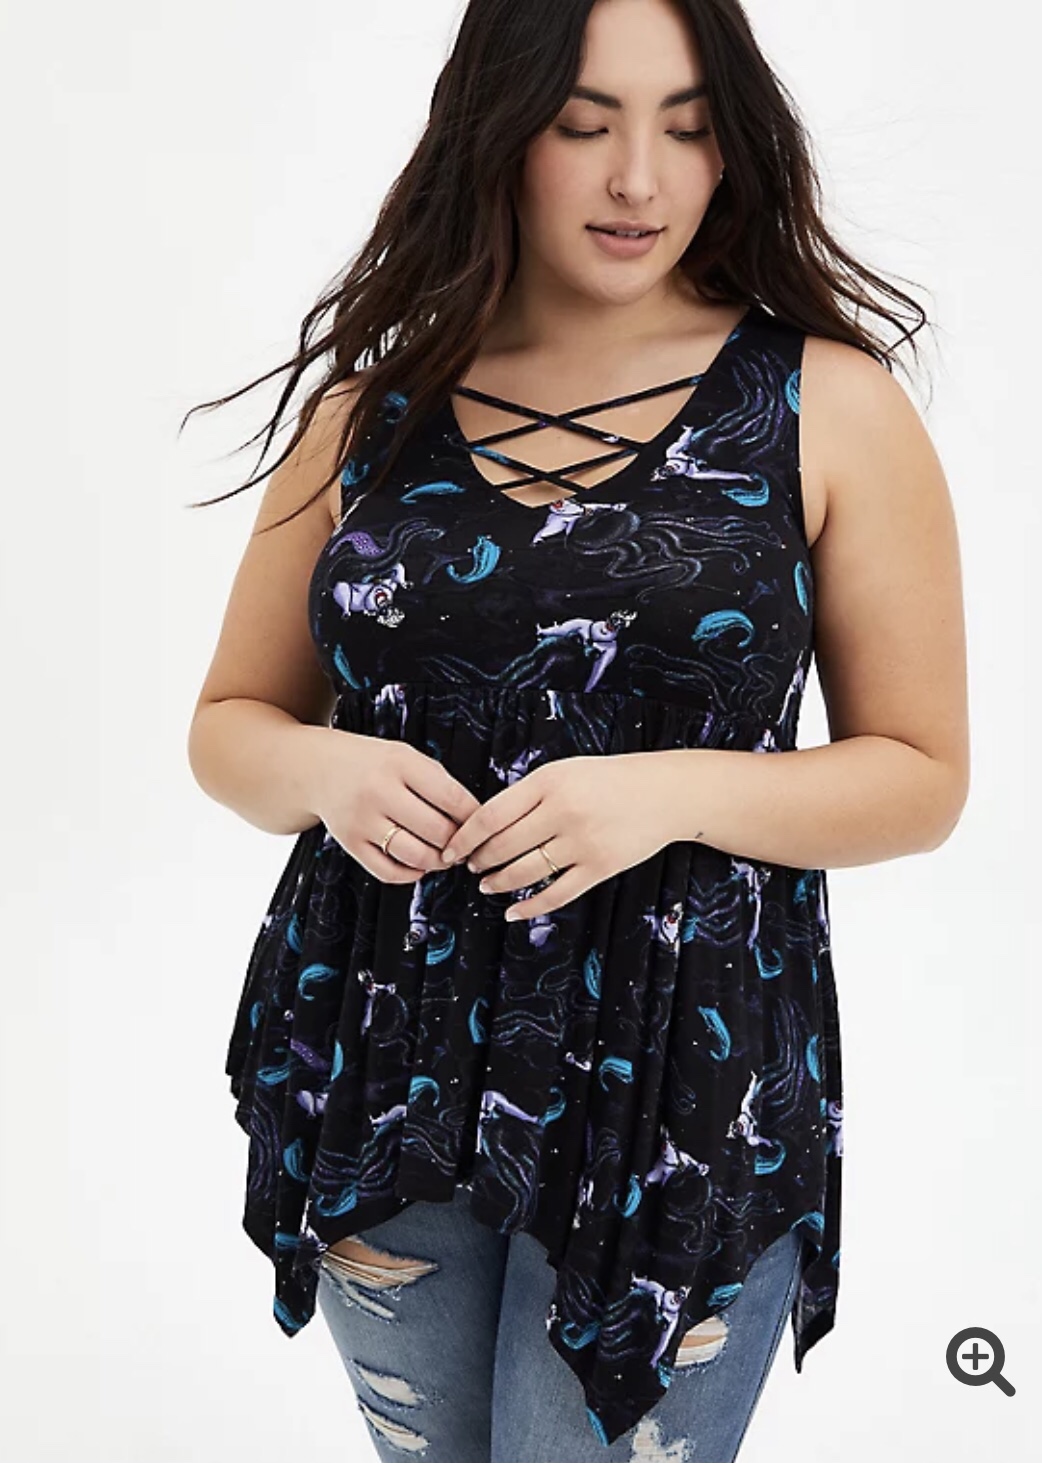 Go Under The Sea With The Little Mermaid Torrid Collection - Fashion